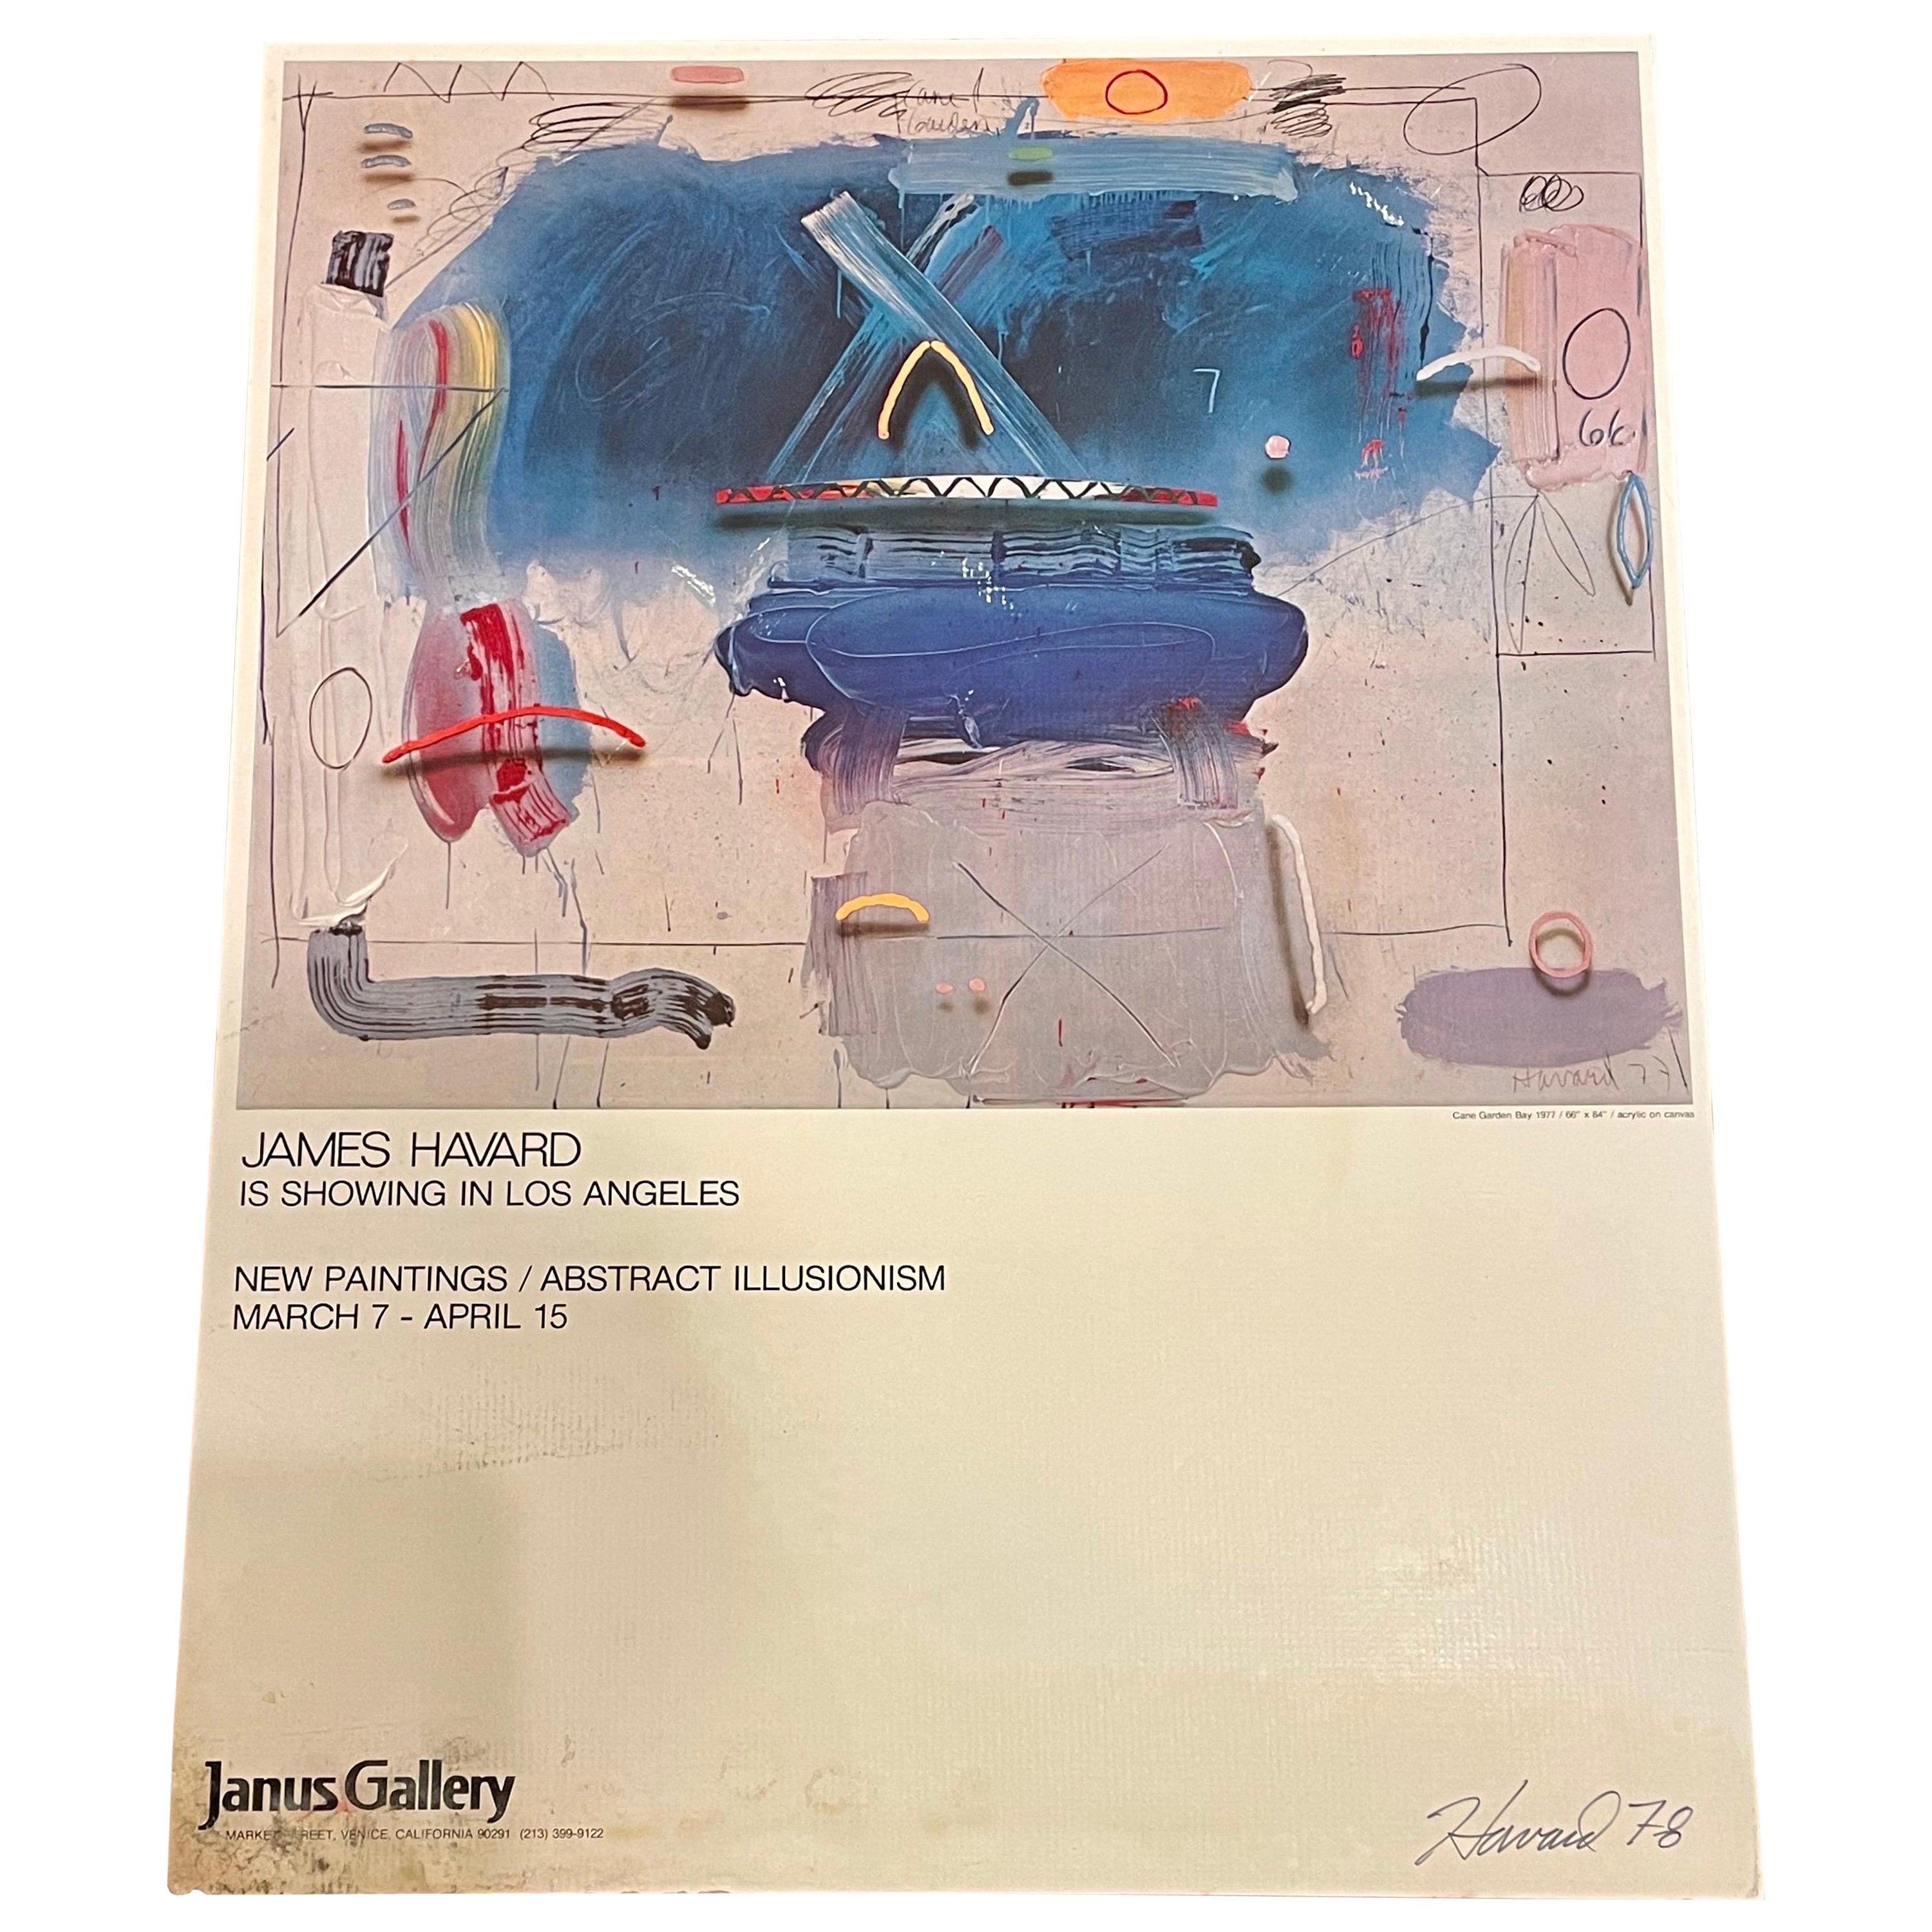 Original Exhibition Rare Janus Gallery Poster Signed & Dated by James Havard For Sale